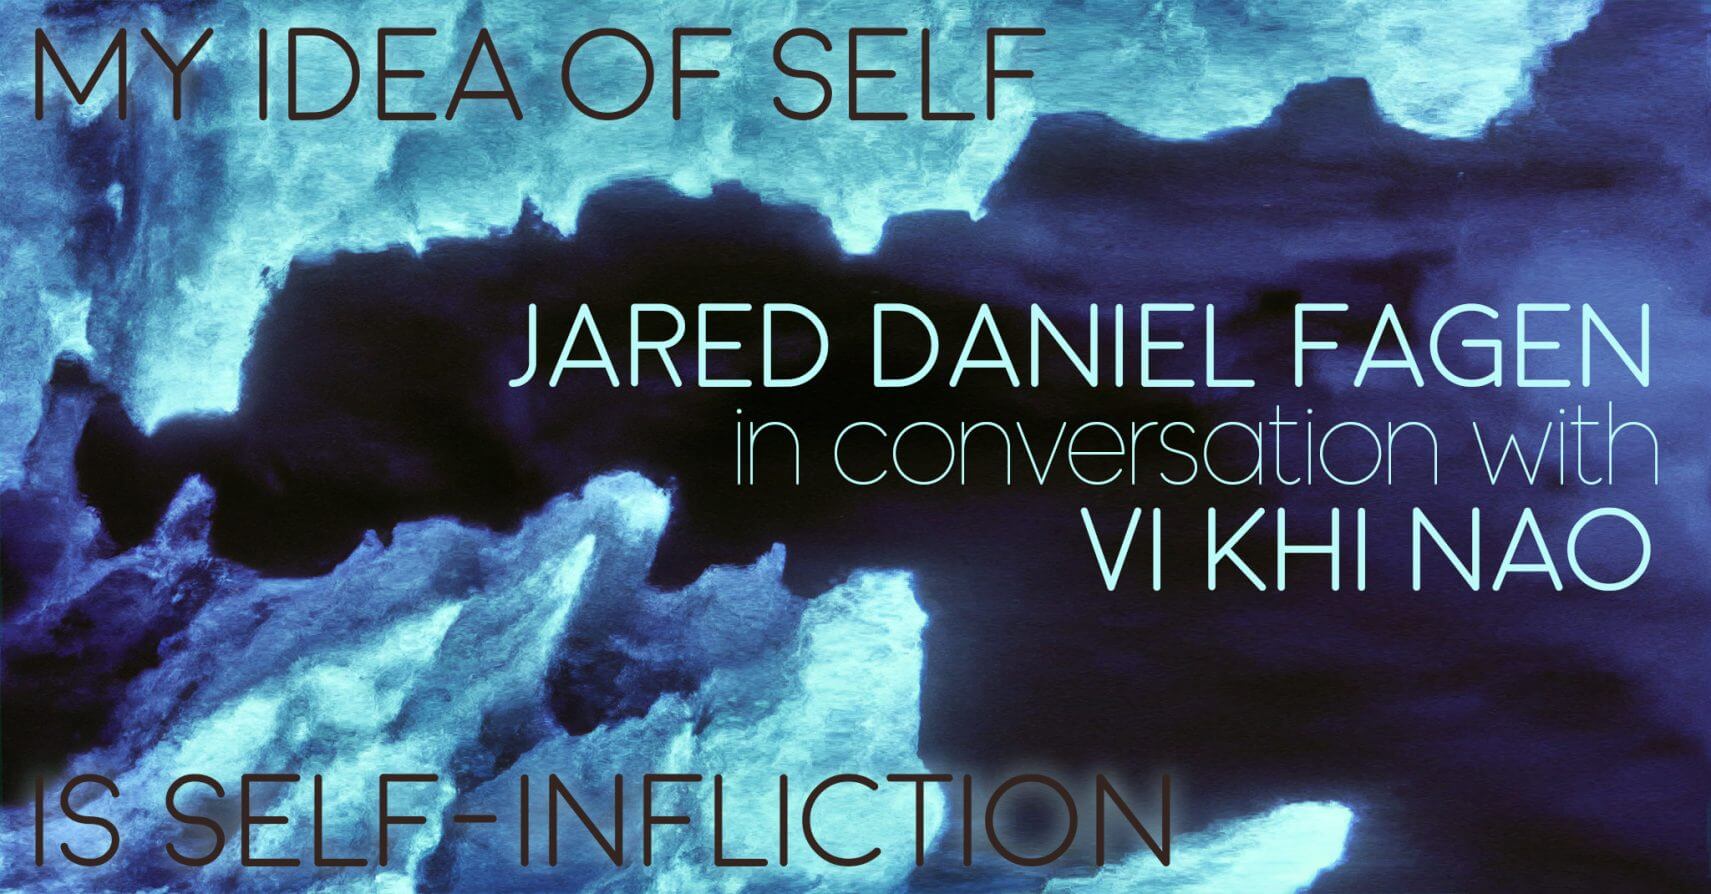 MY IDEA OF SELF IS SELF-INFLICTION: Jared Daniel Fagen in conversation with Vi Khi Nao